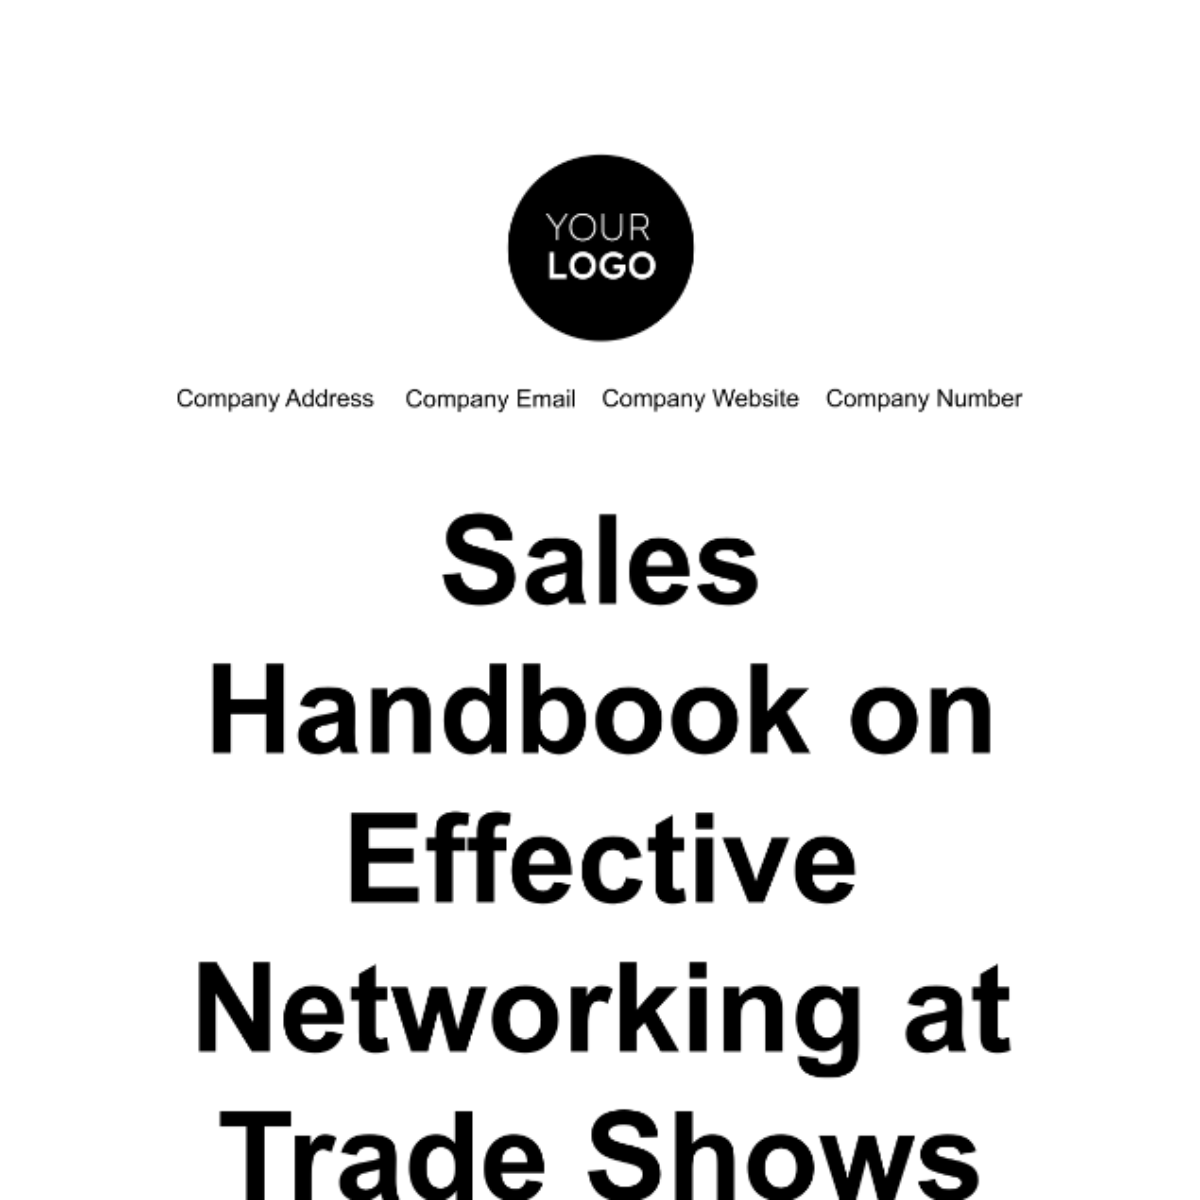 Sales Handbook on Effective Networking at Trade Shows Template